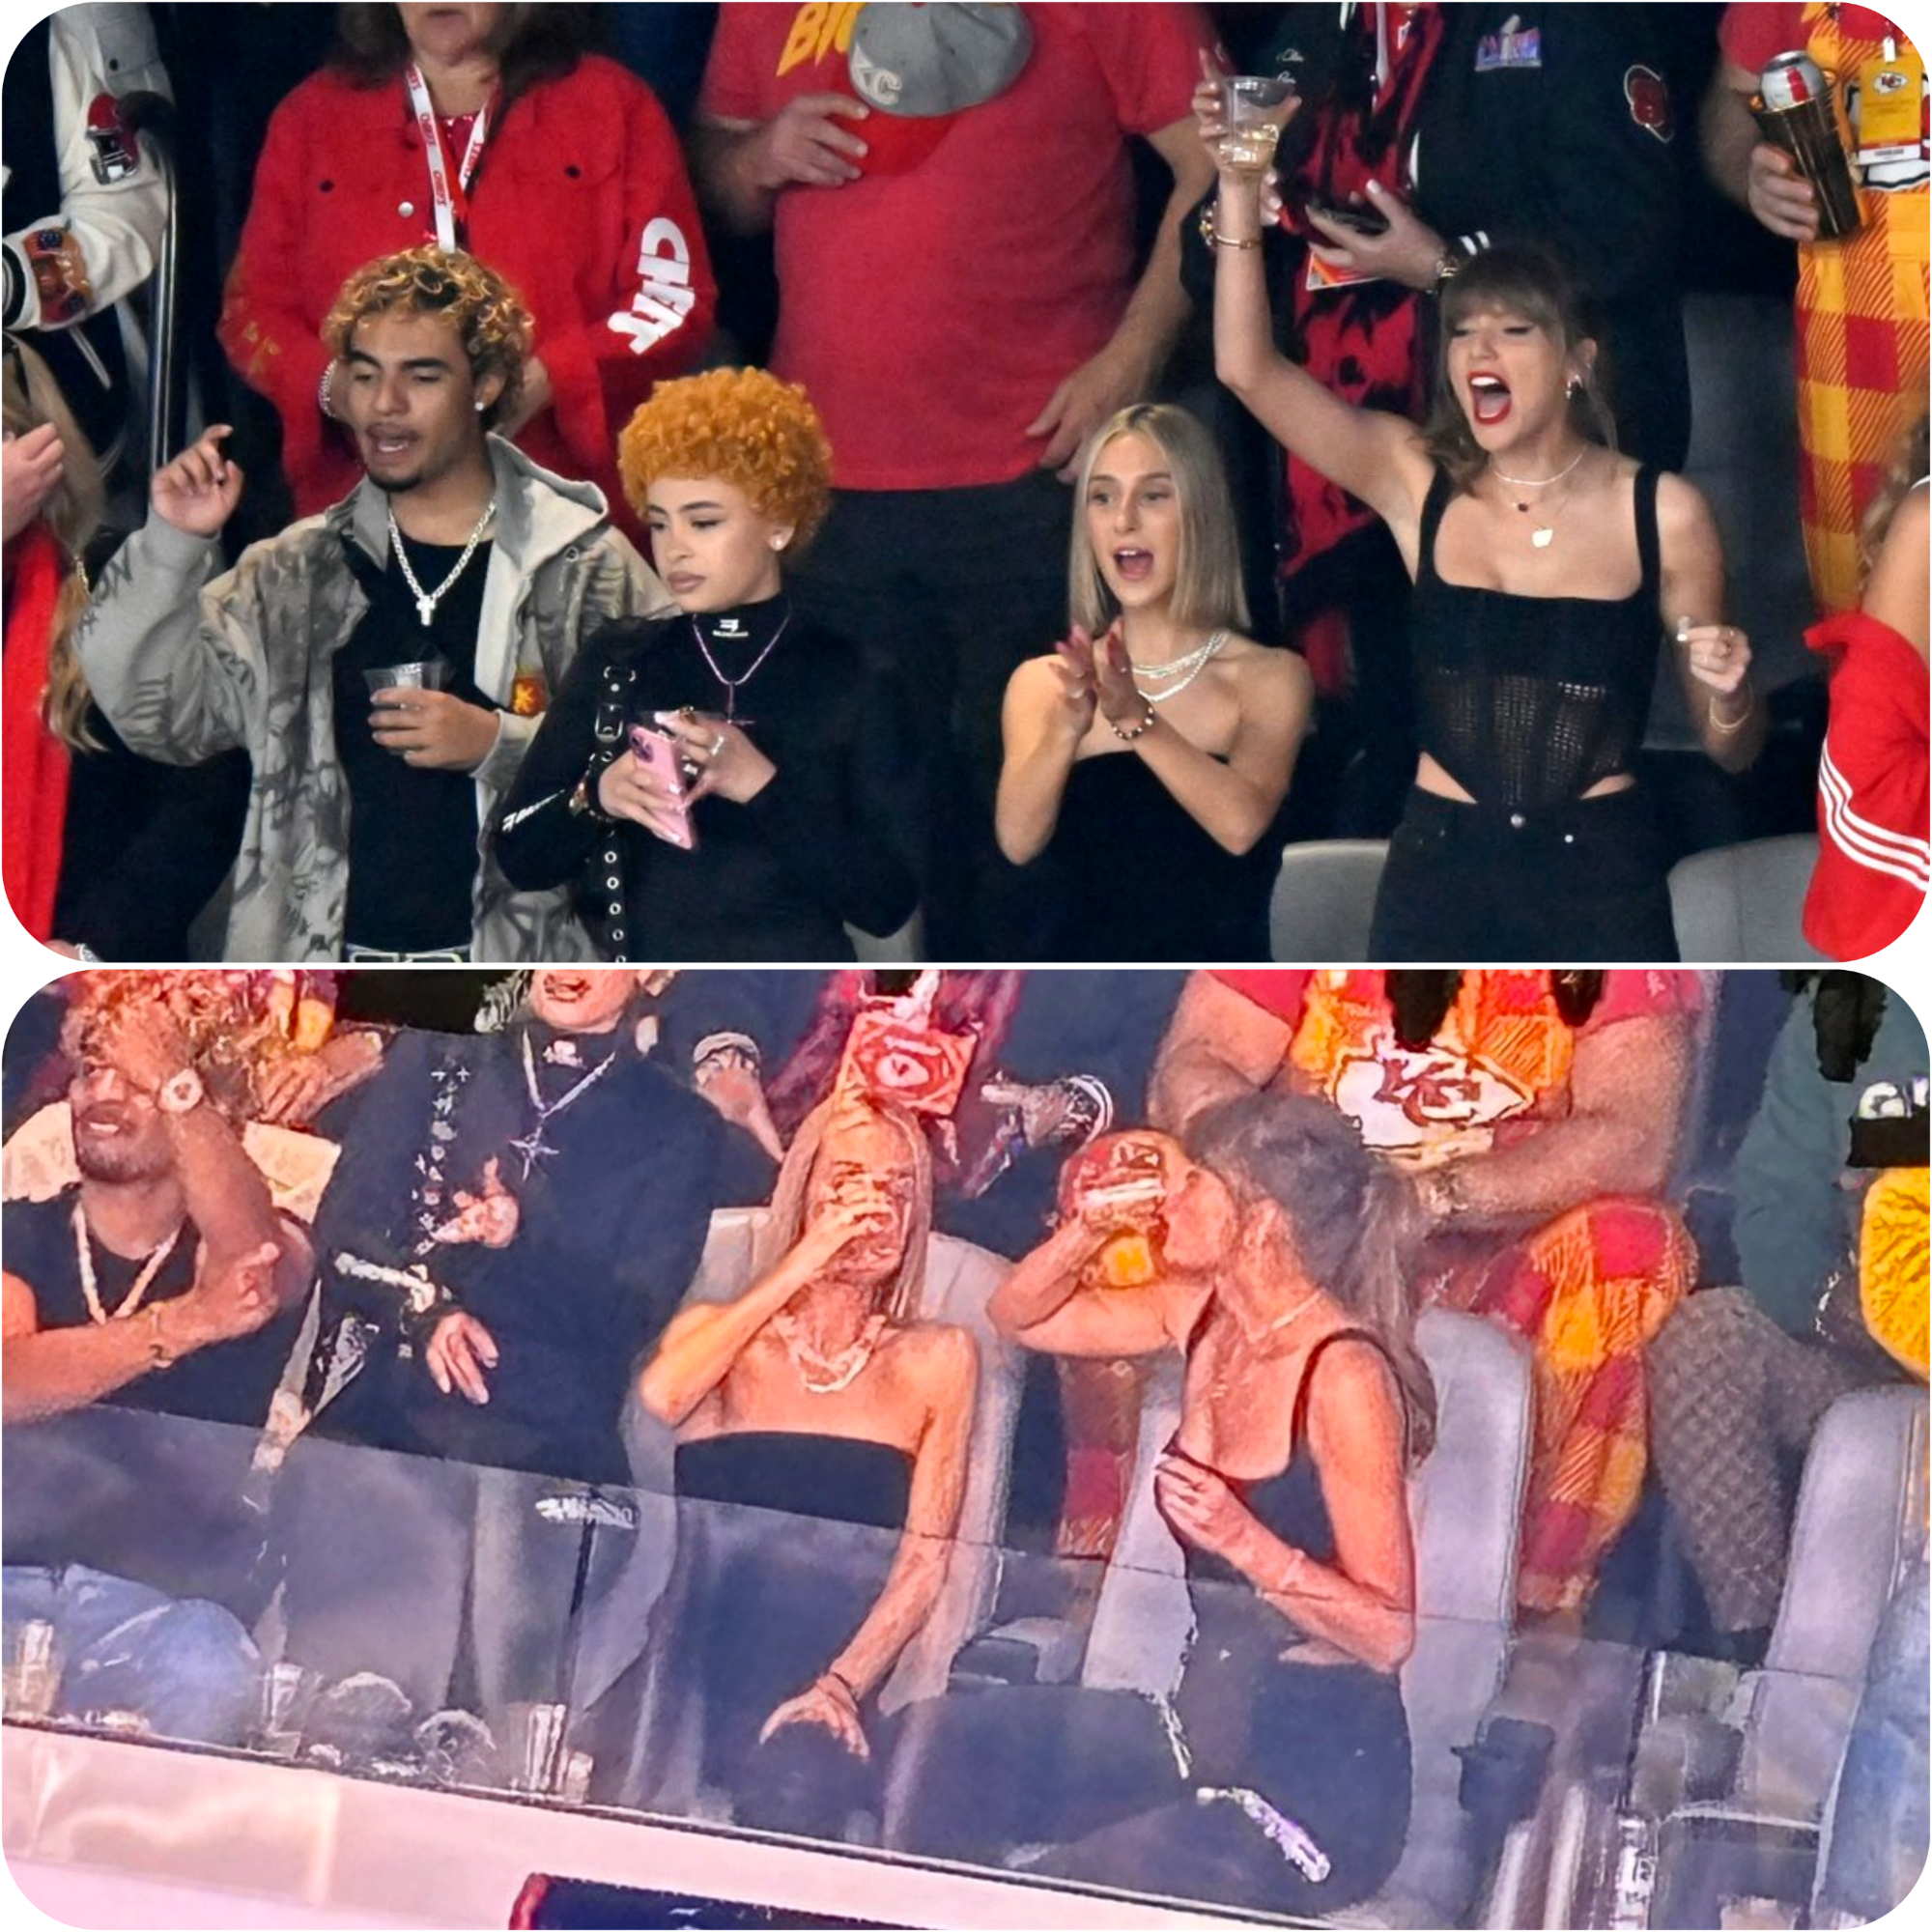 Taylor Swift Chugged a Beer at the Super Bowl, Got Booed